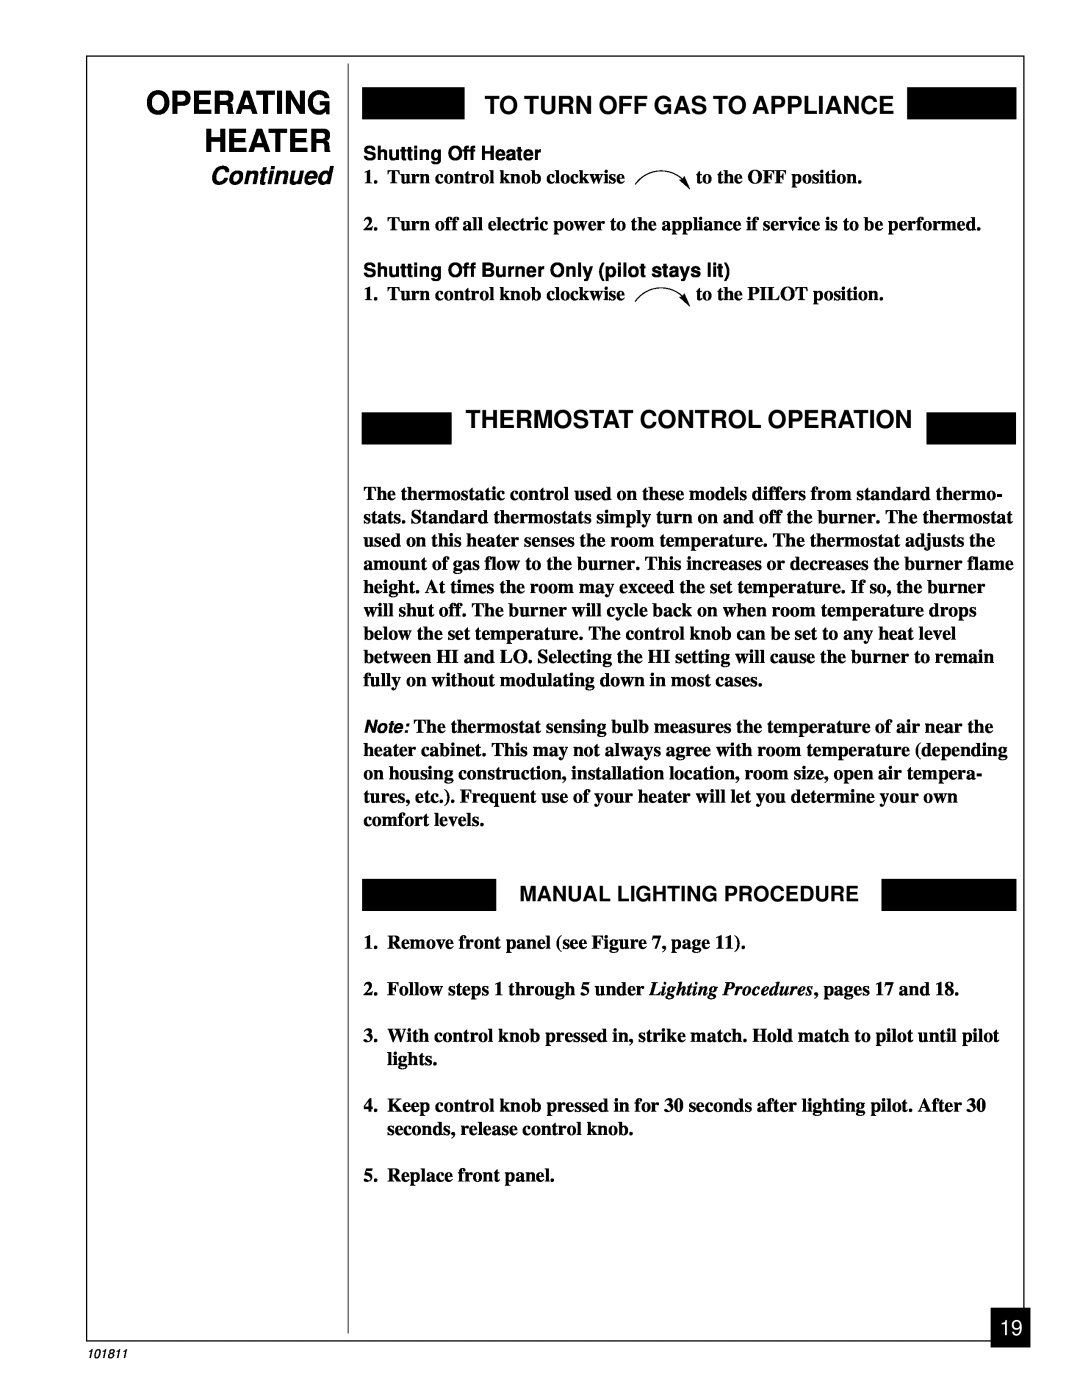 Desa 101811-01C.pdf To Turn Off Gas To Appliance, Thermostat Control Operation, Operating Heater, Continued 